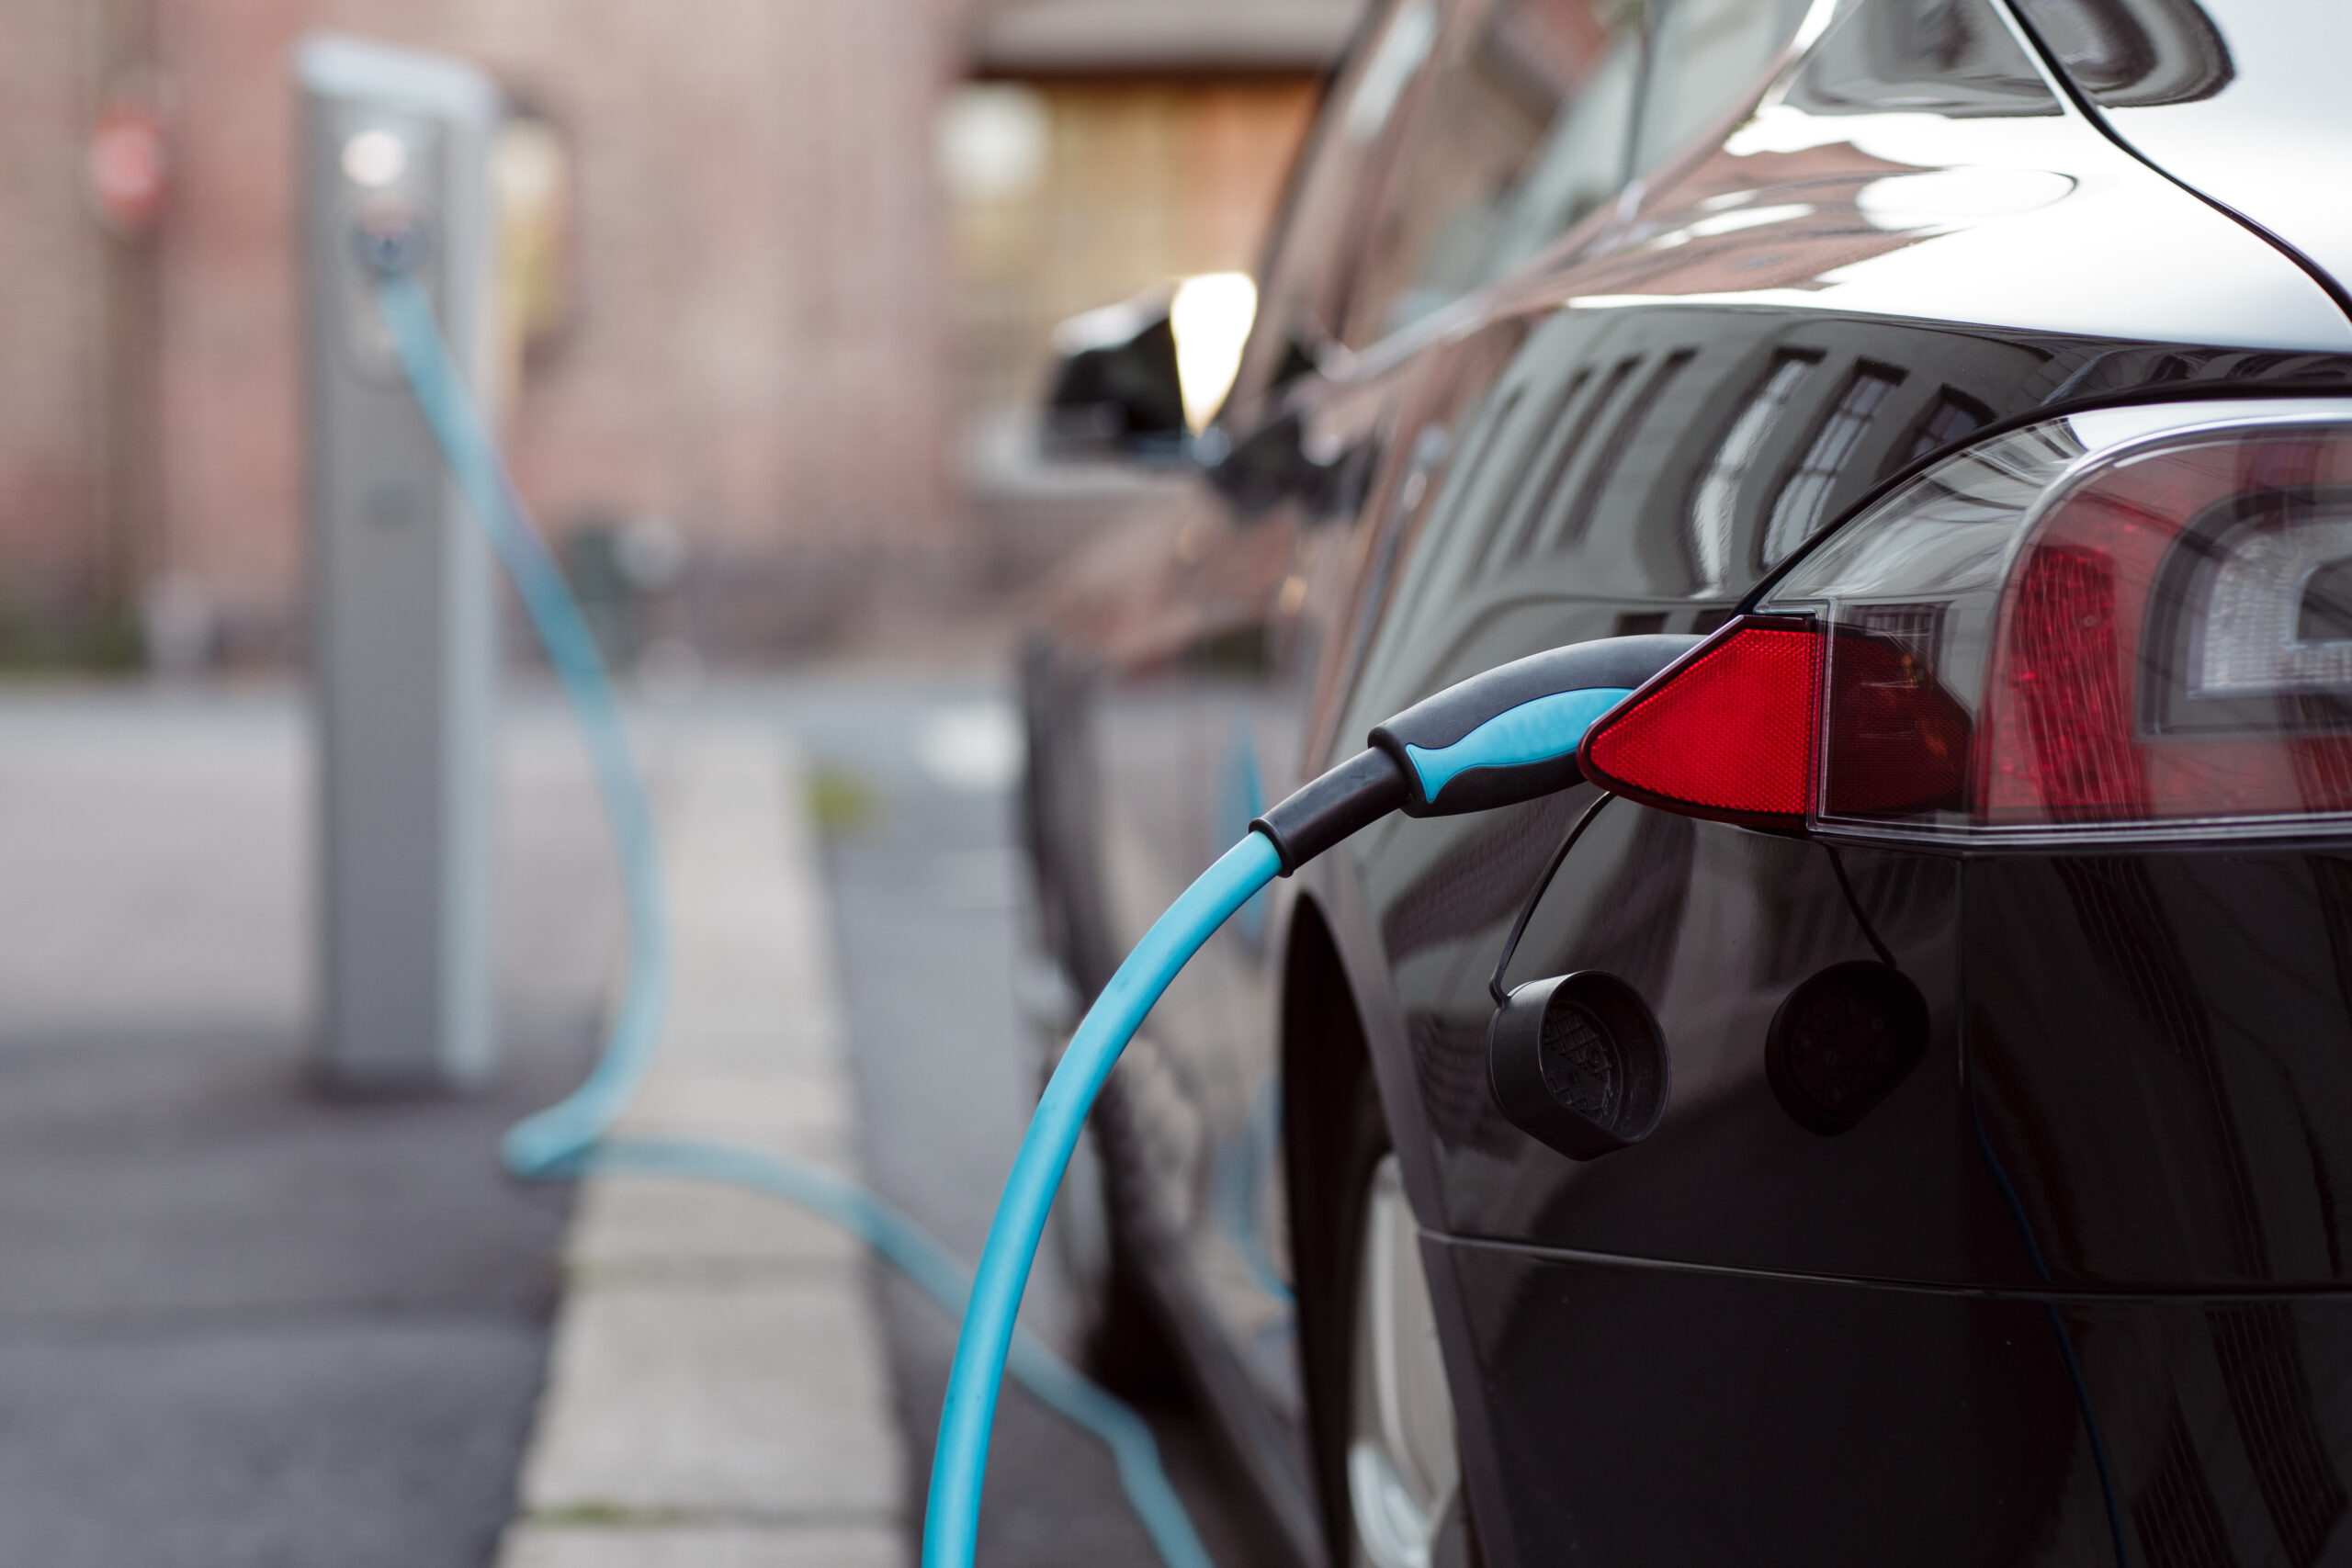 Thousands of EV chargers will soon line America’s highways